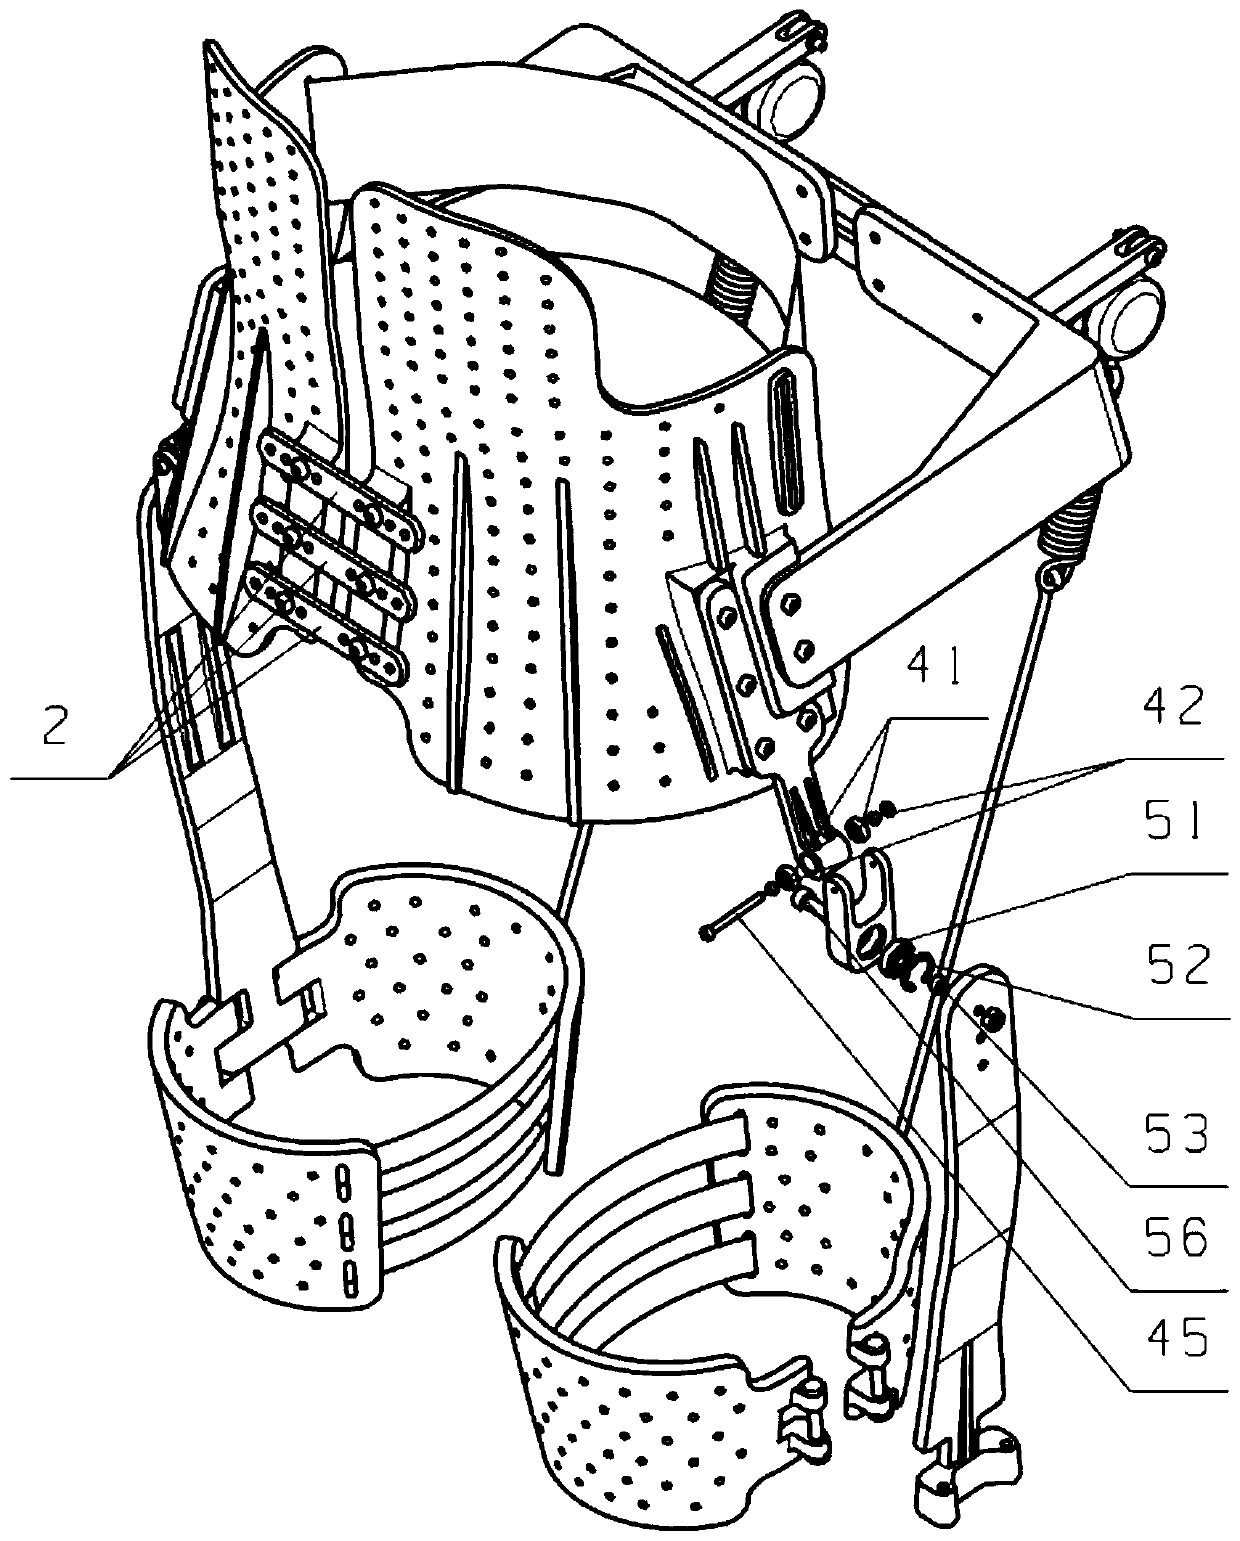 A hip joint passive exoskeleton device based on energy time-sharing regulation